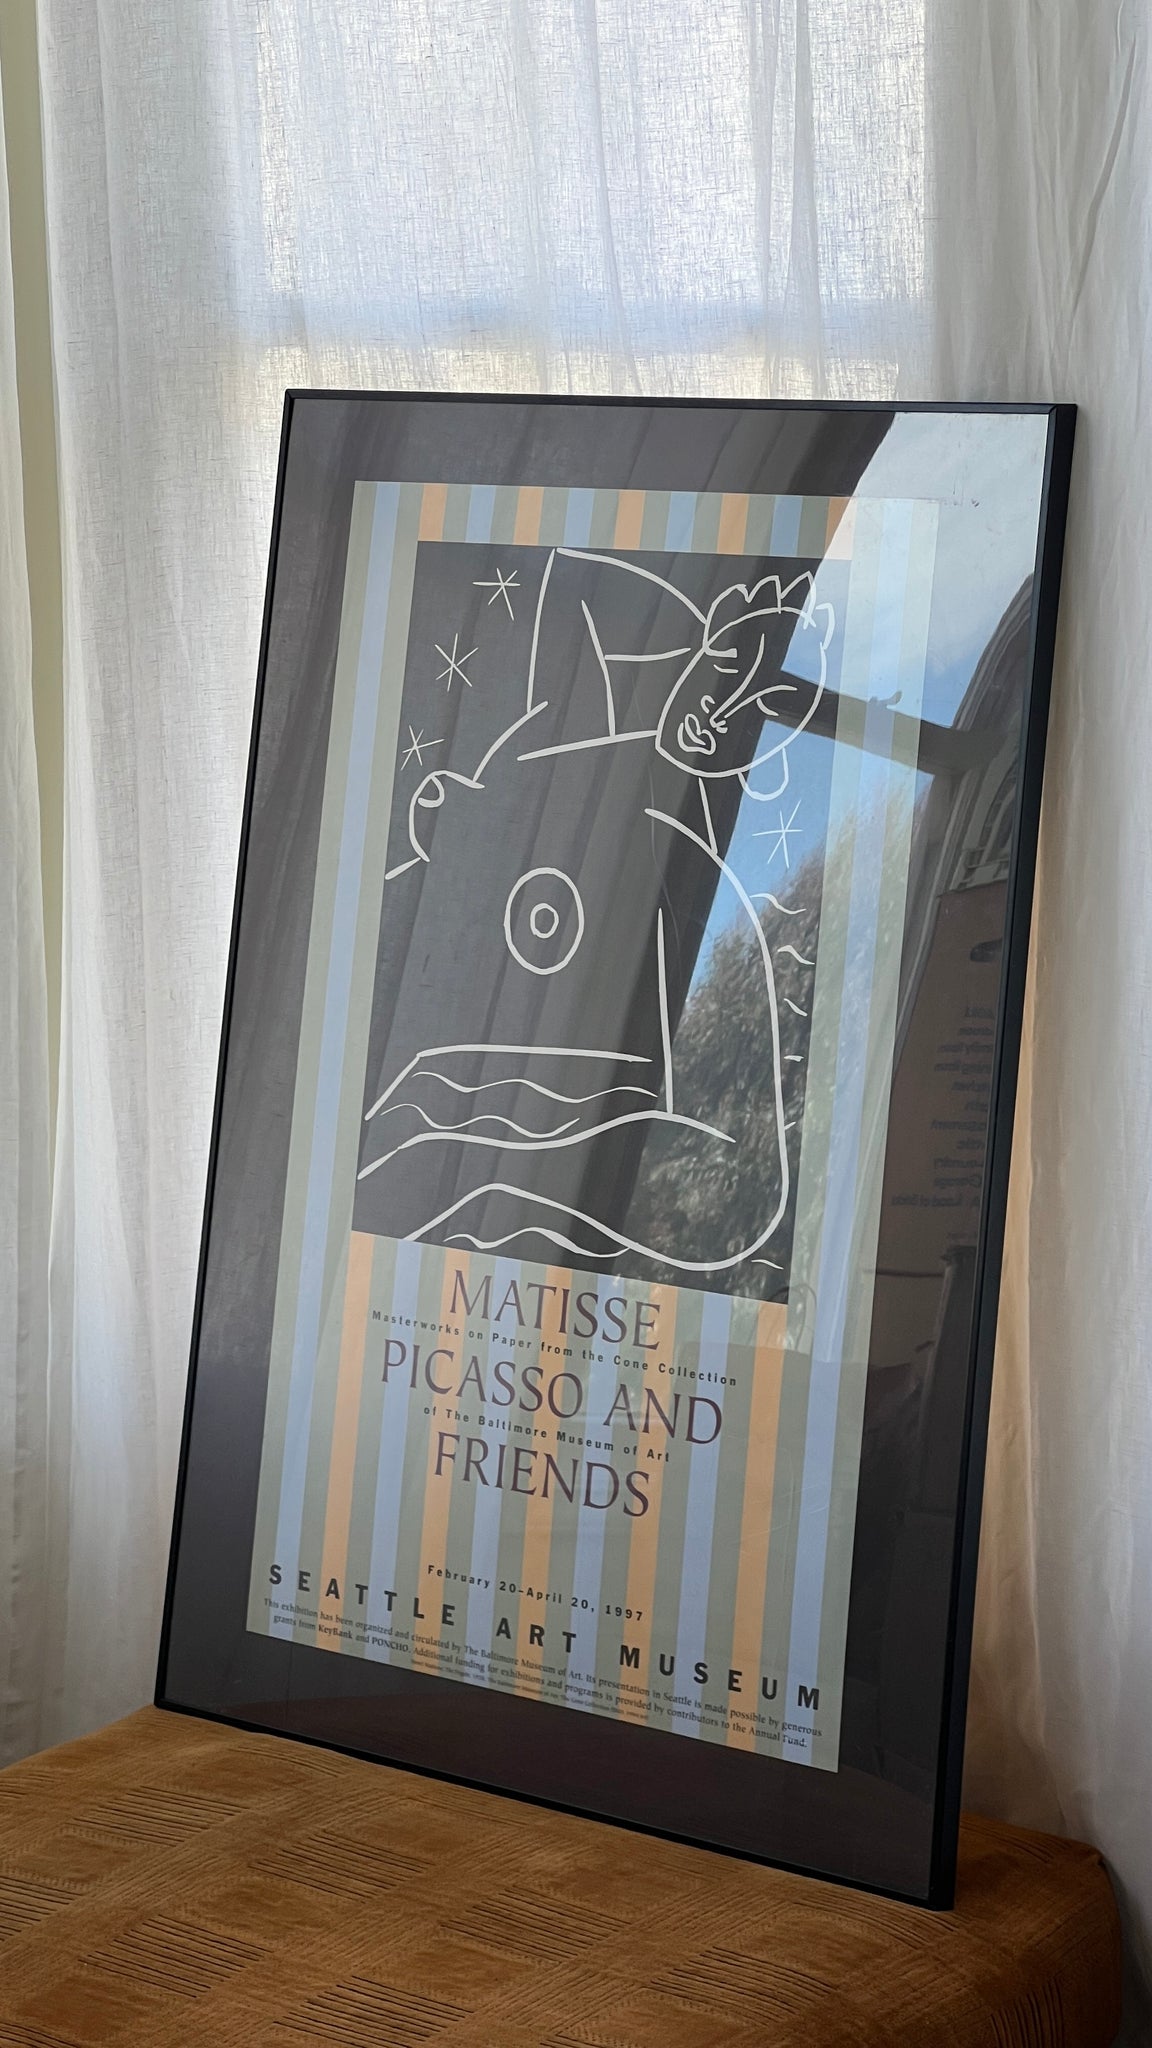 "Matisse, Picasso and Friends" Print by Picasso, 1997